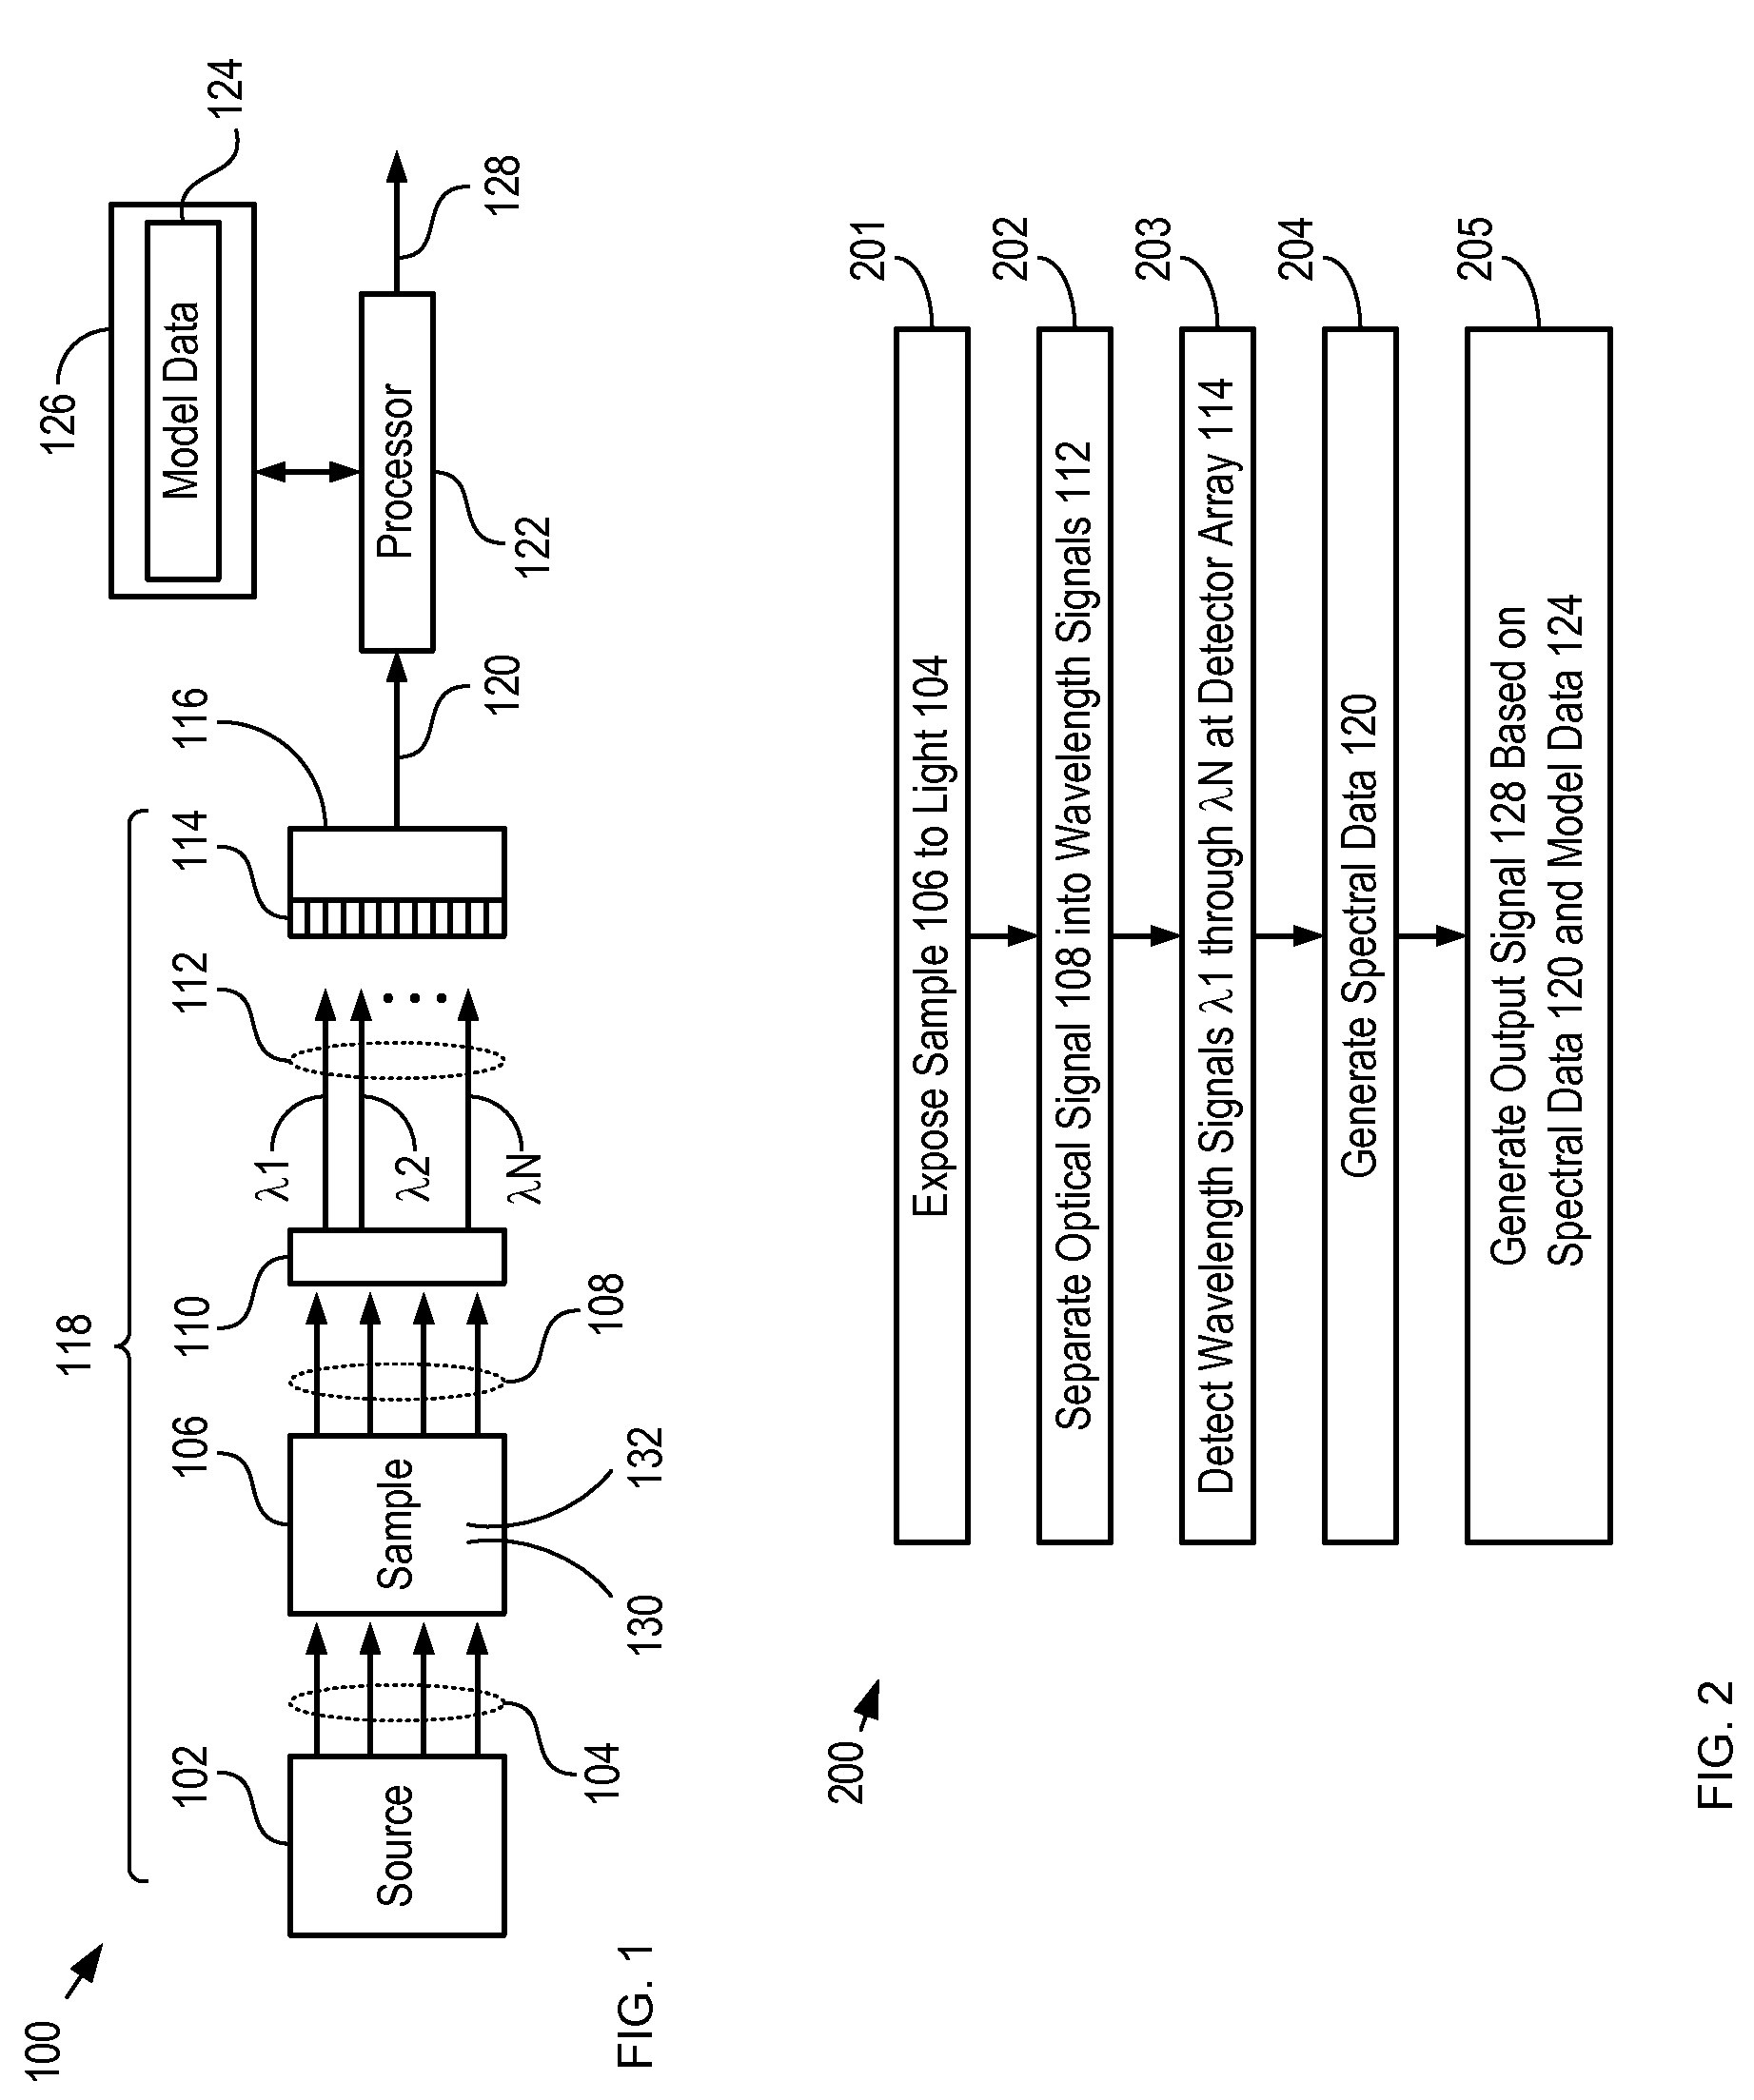 Apparatus and method for detecting and quantifying analytes in solution